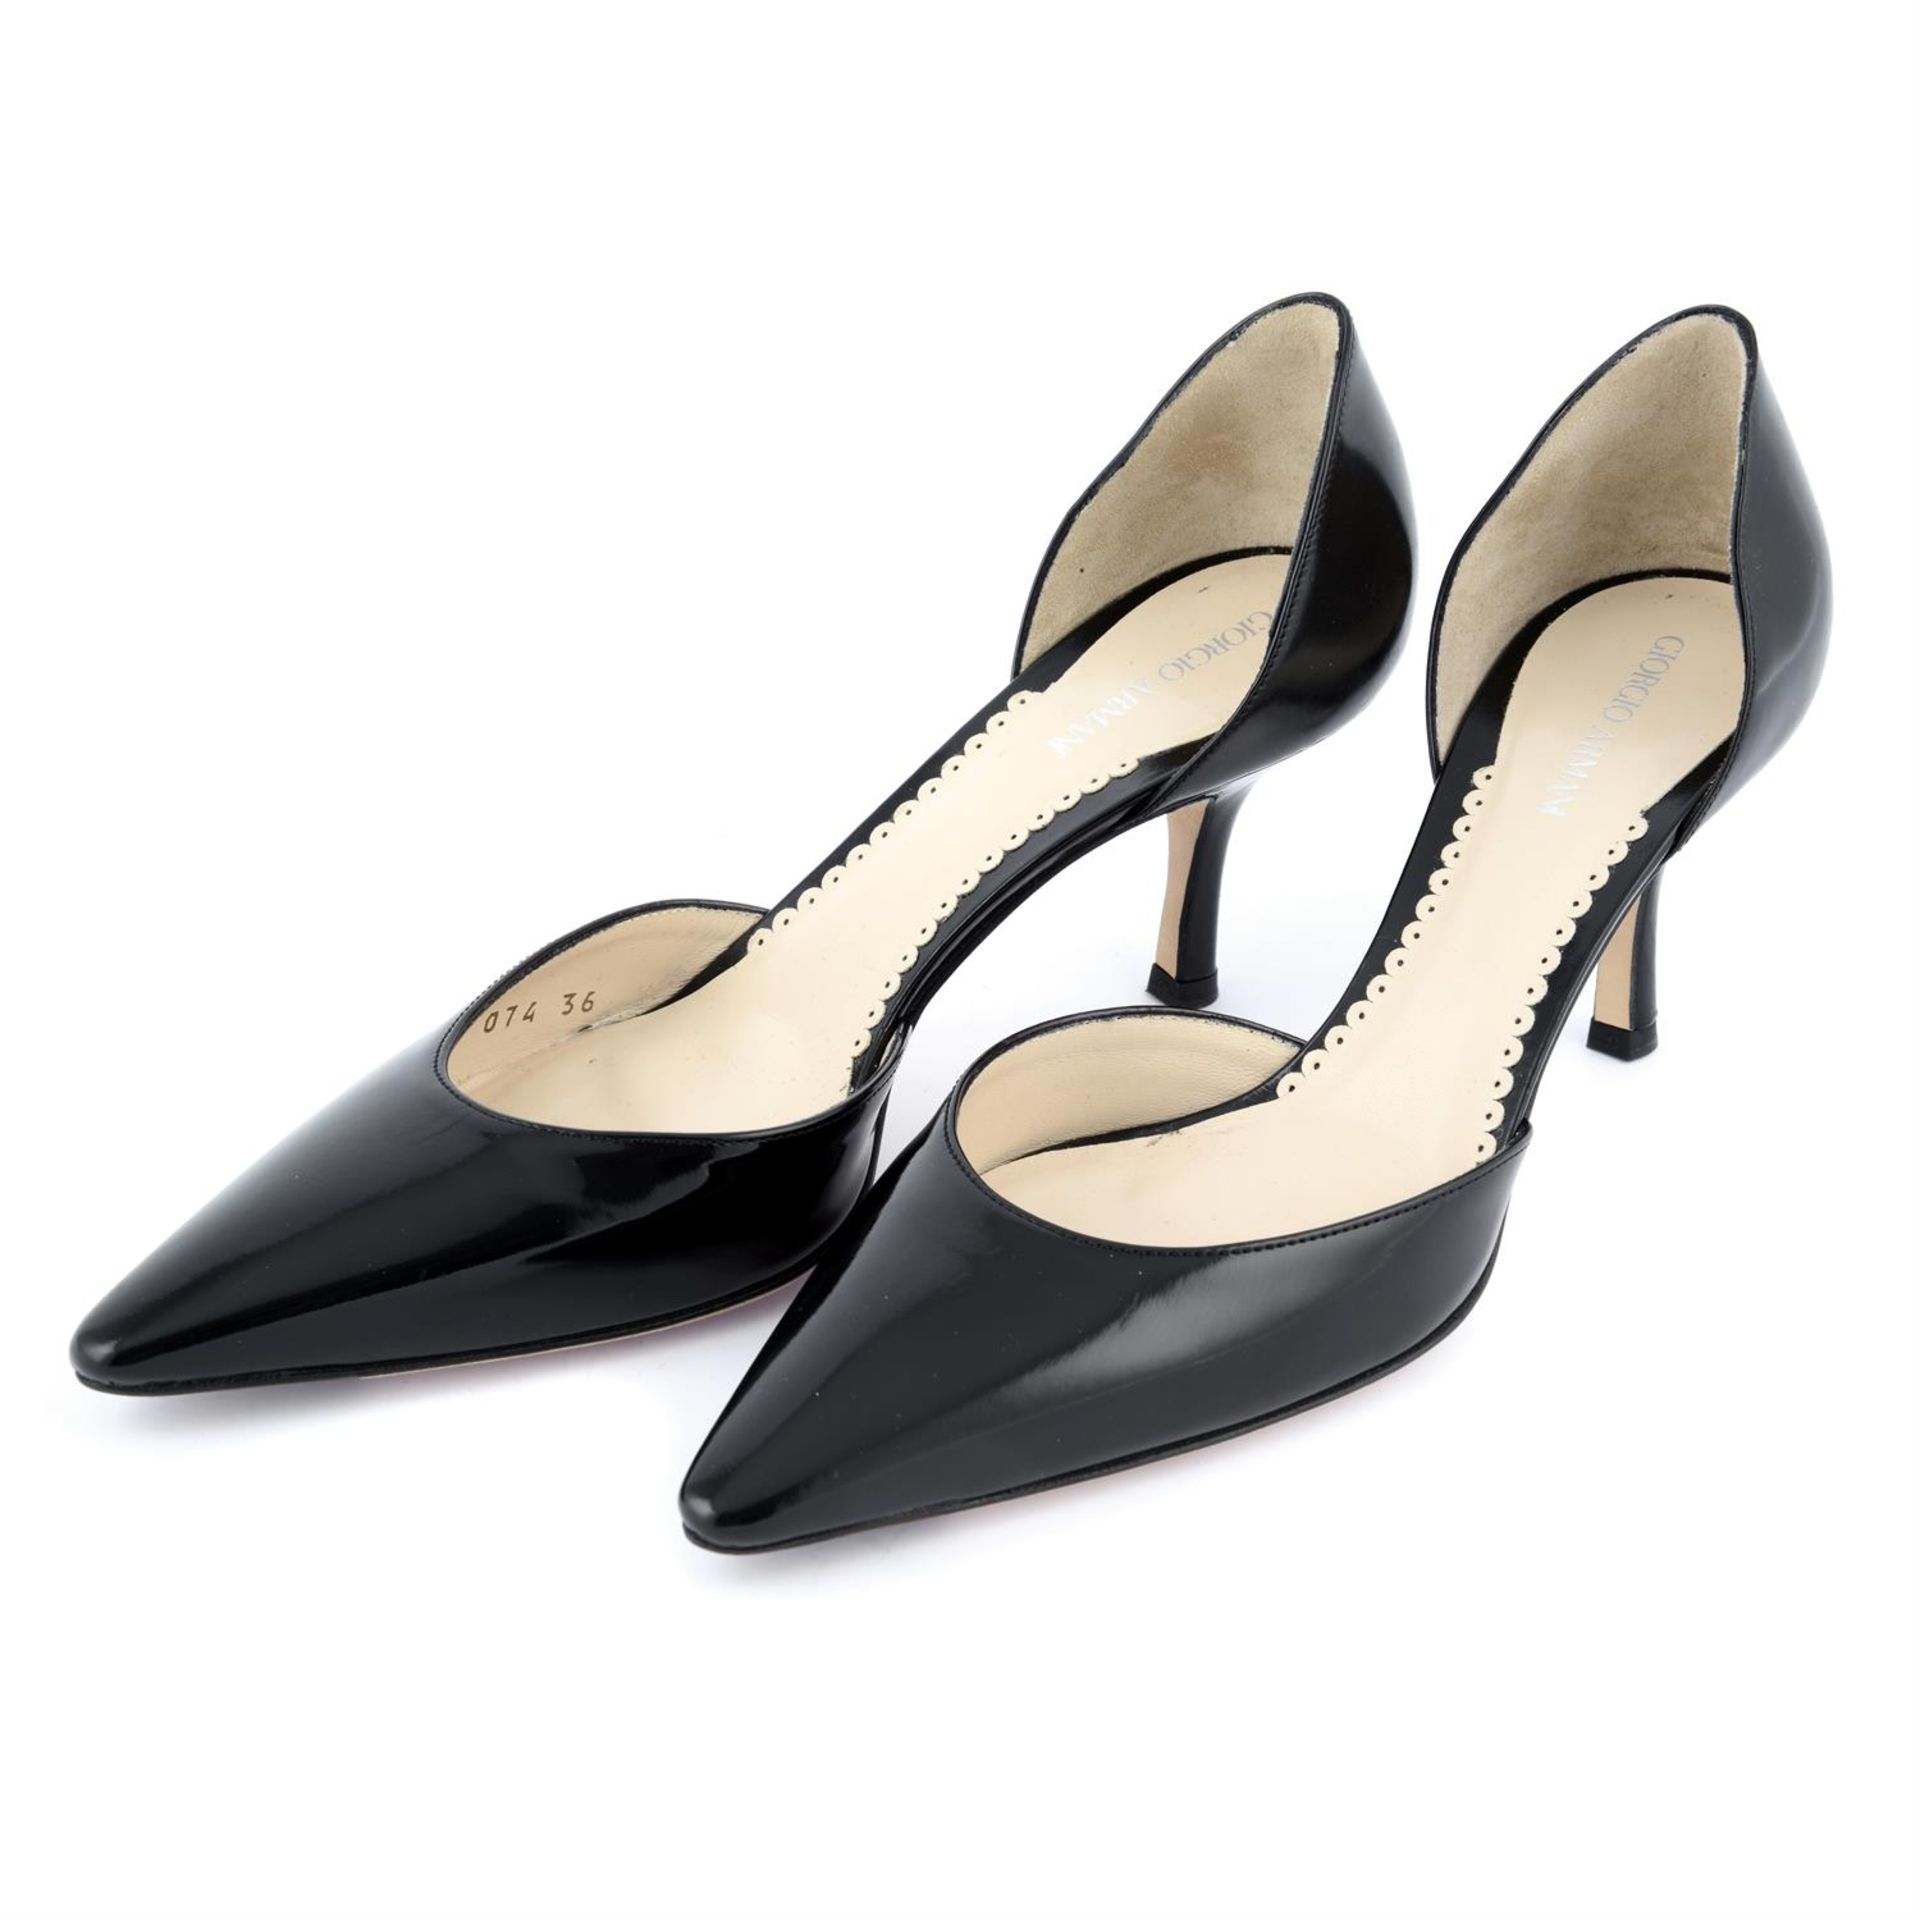 ARMANI - a pair of black patent leather kitten heels.